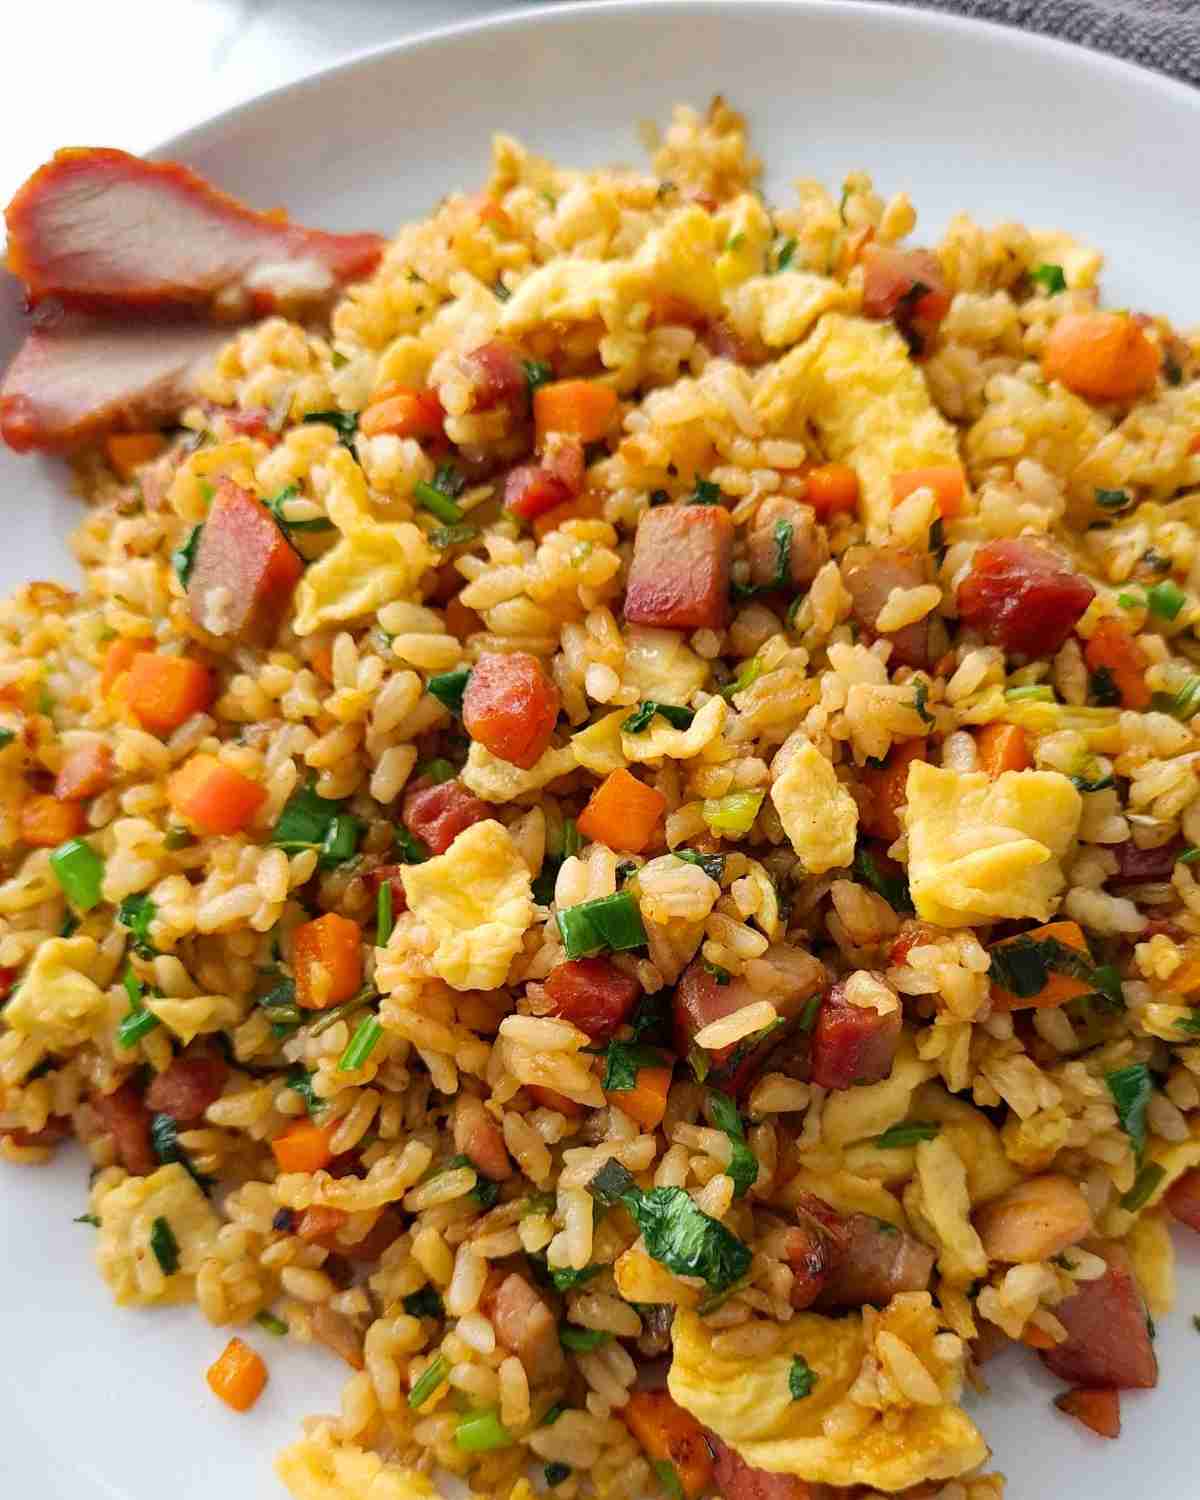 A plate of fried rice with focus on BBQ pork pieces and golden eggs